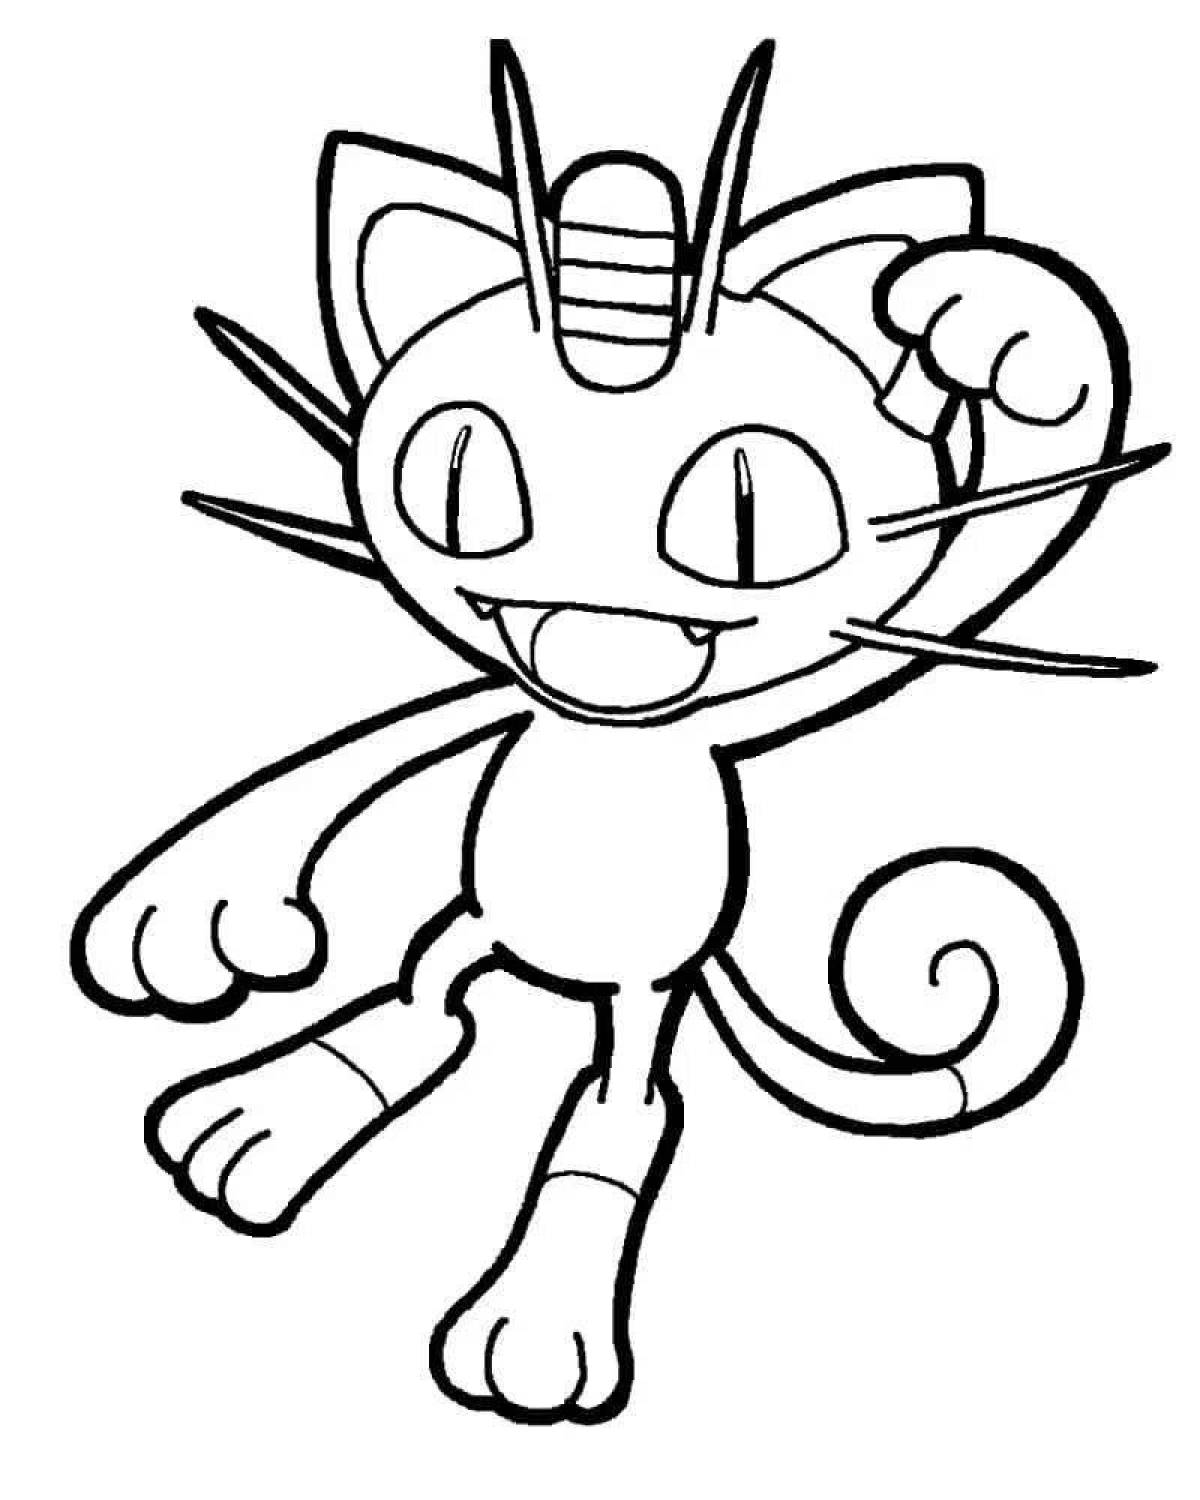 Coloring cute meowth